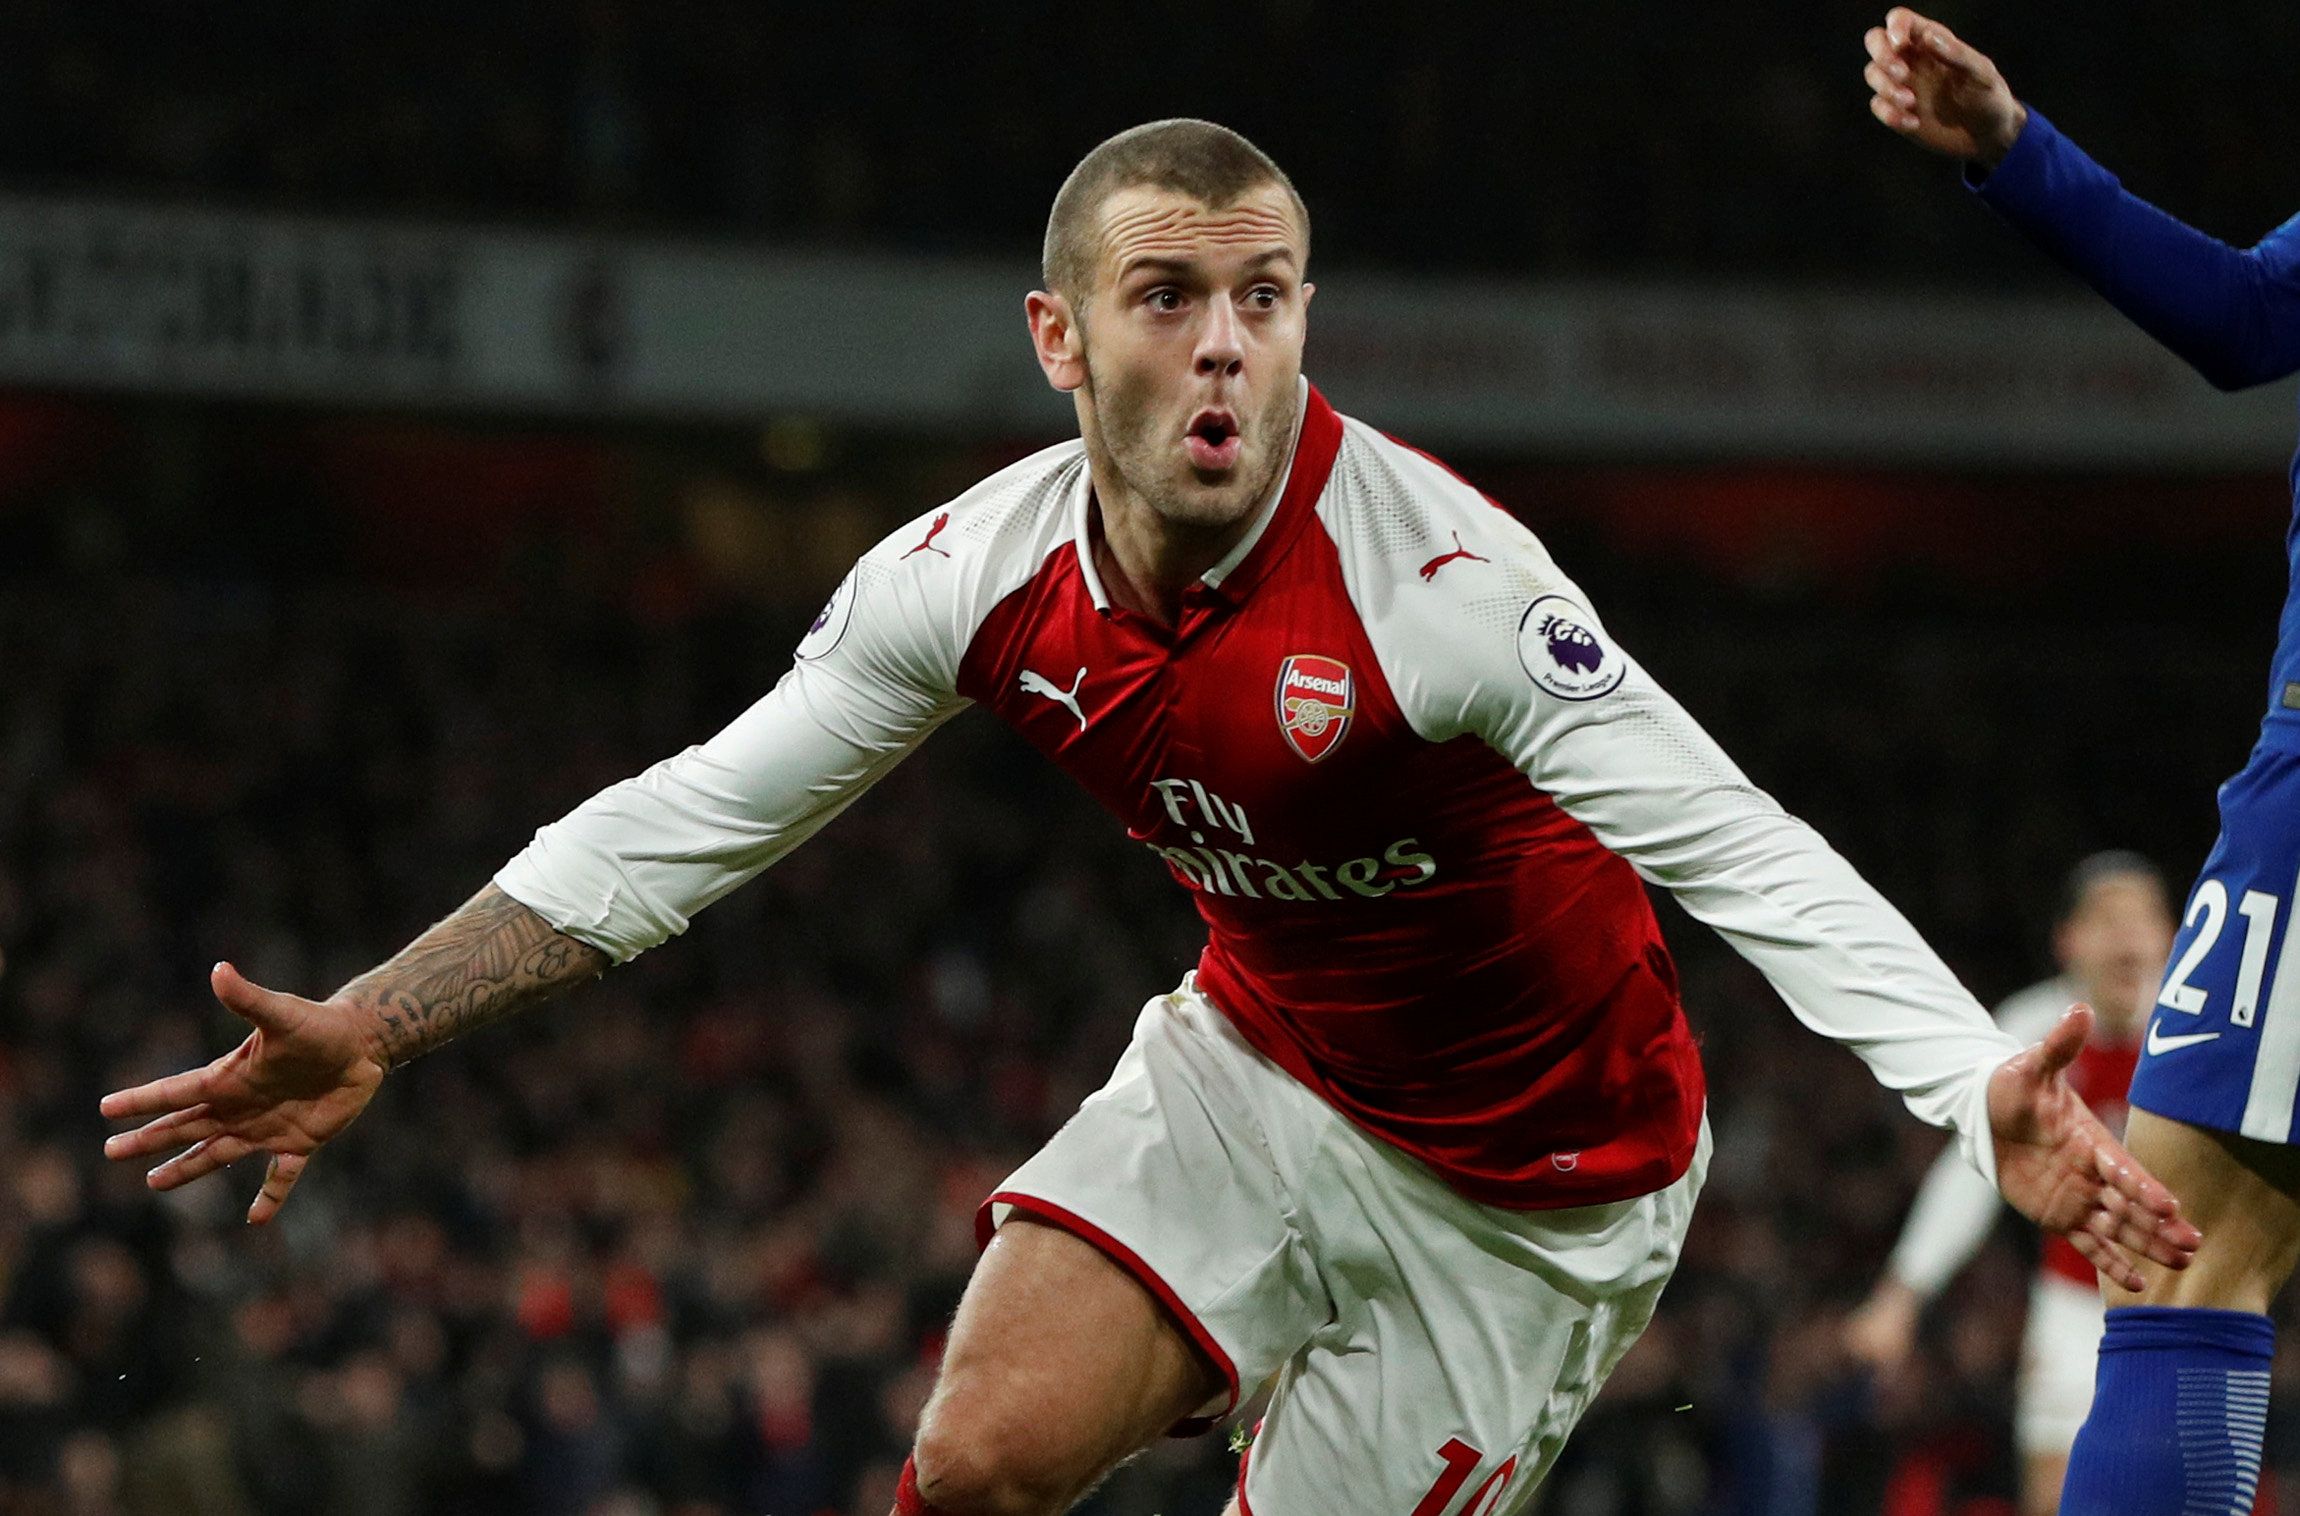 Soccer Football - Premier League - Arsenal vs Chelsea - Emirates Stadium, London, Britain - January 3, 2018   Arsenal's Jack Wilshere celebrates scoring their first goal    Action Images via Reuters/John Sibley    EDITORIAL USE ONLY. No use with unauthorized audio, video, data, fixture lists, club/league logos or 